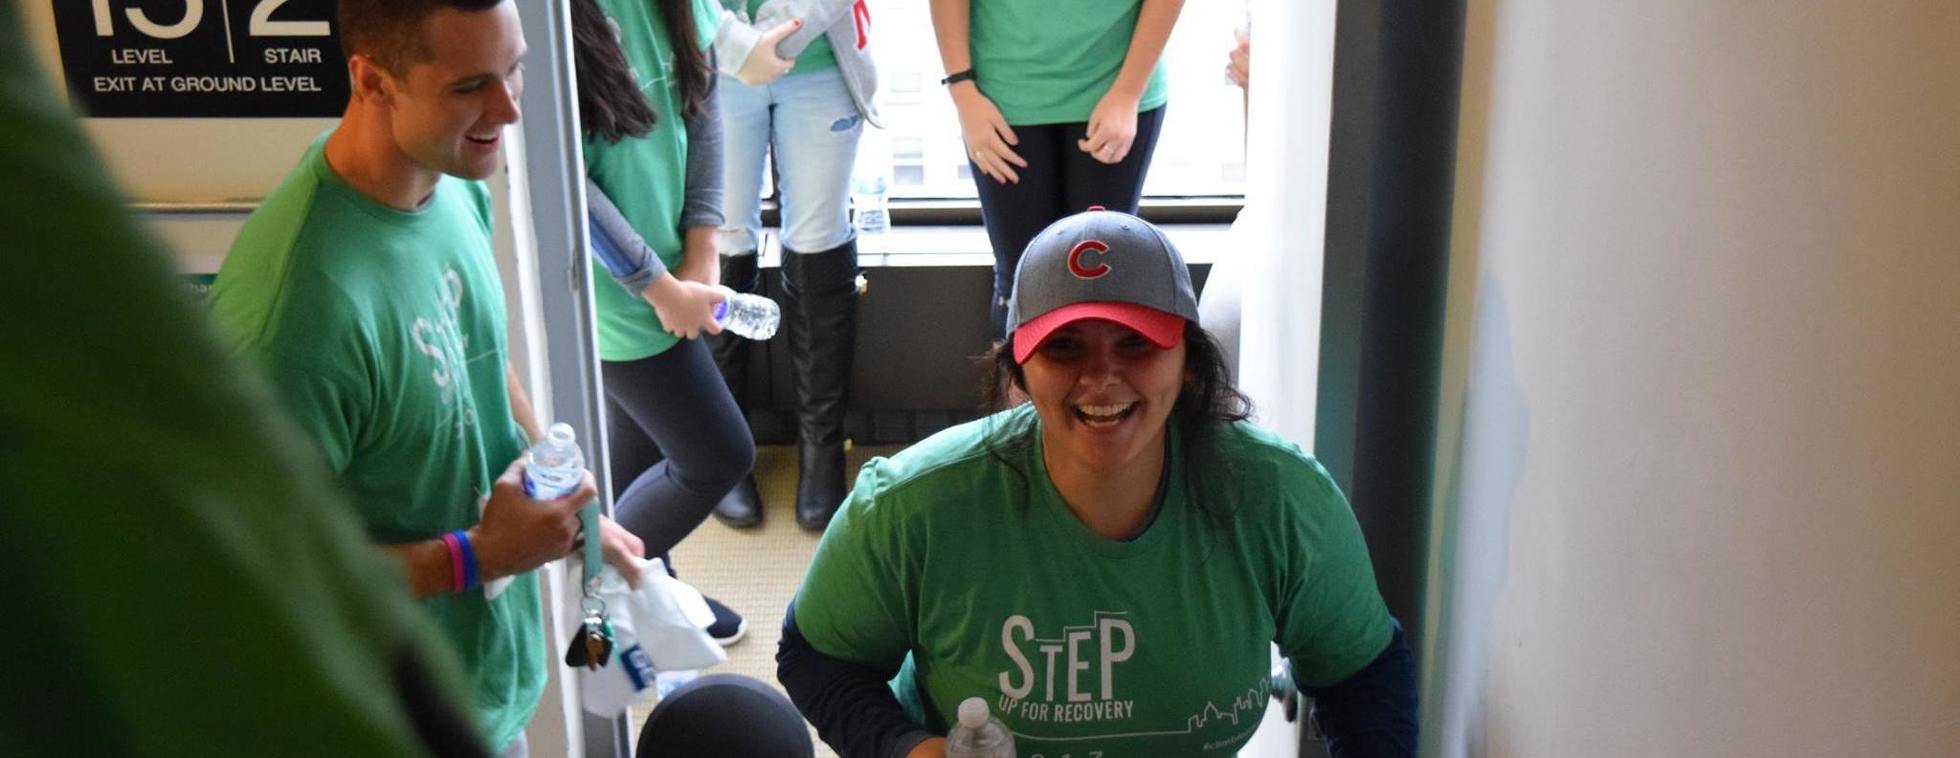 Step Up for Recovery 2019